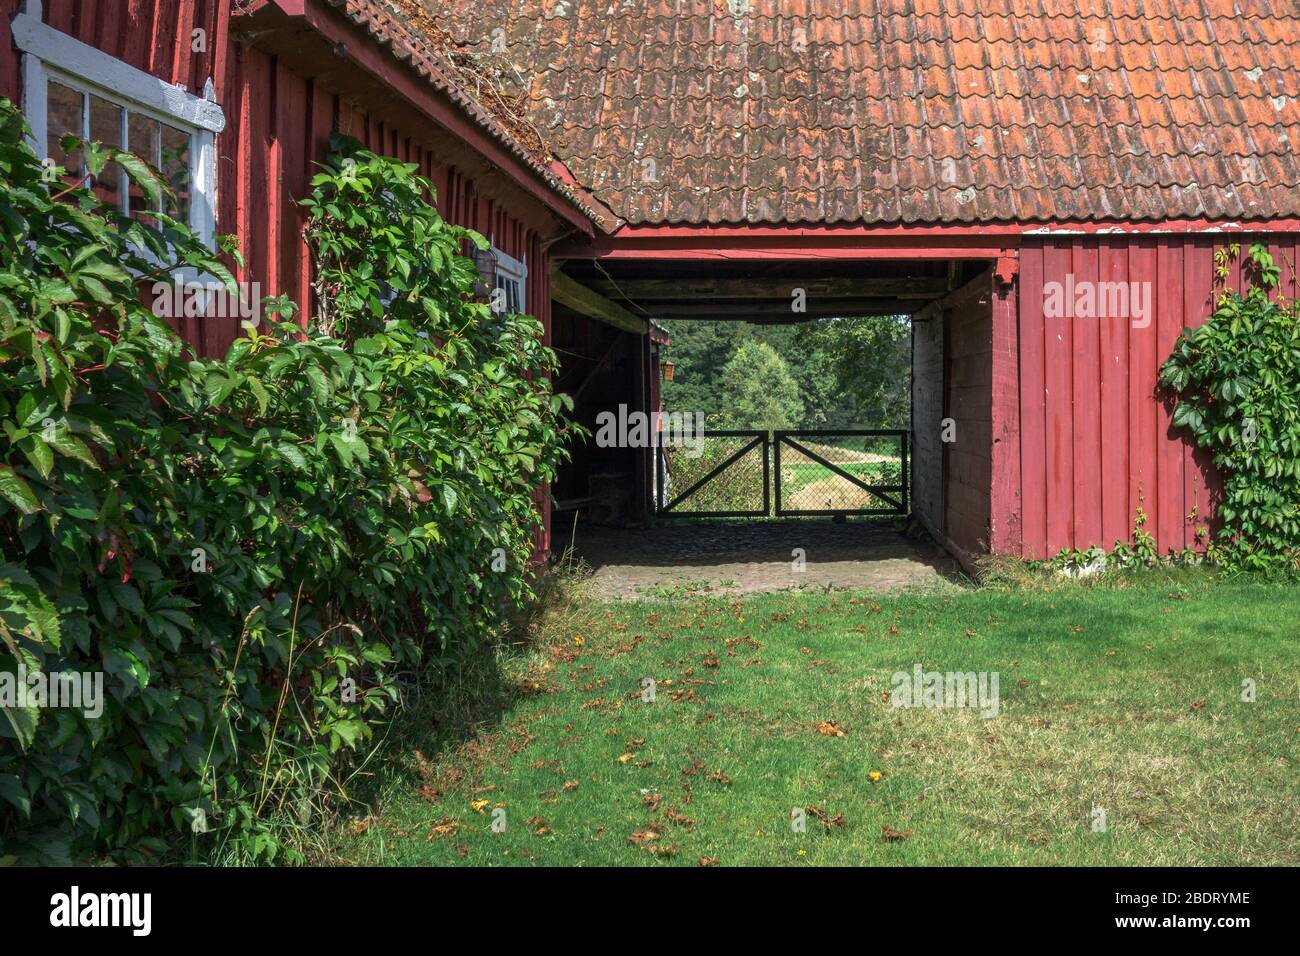 Exit from farmyard with traditional red wood panel buildings in agricultural landscape in Skane district, Sweden Stock Photo